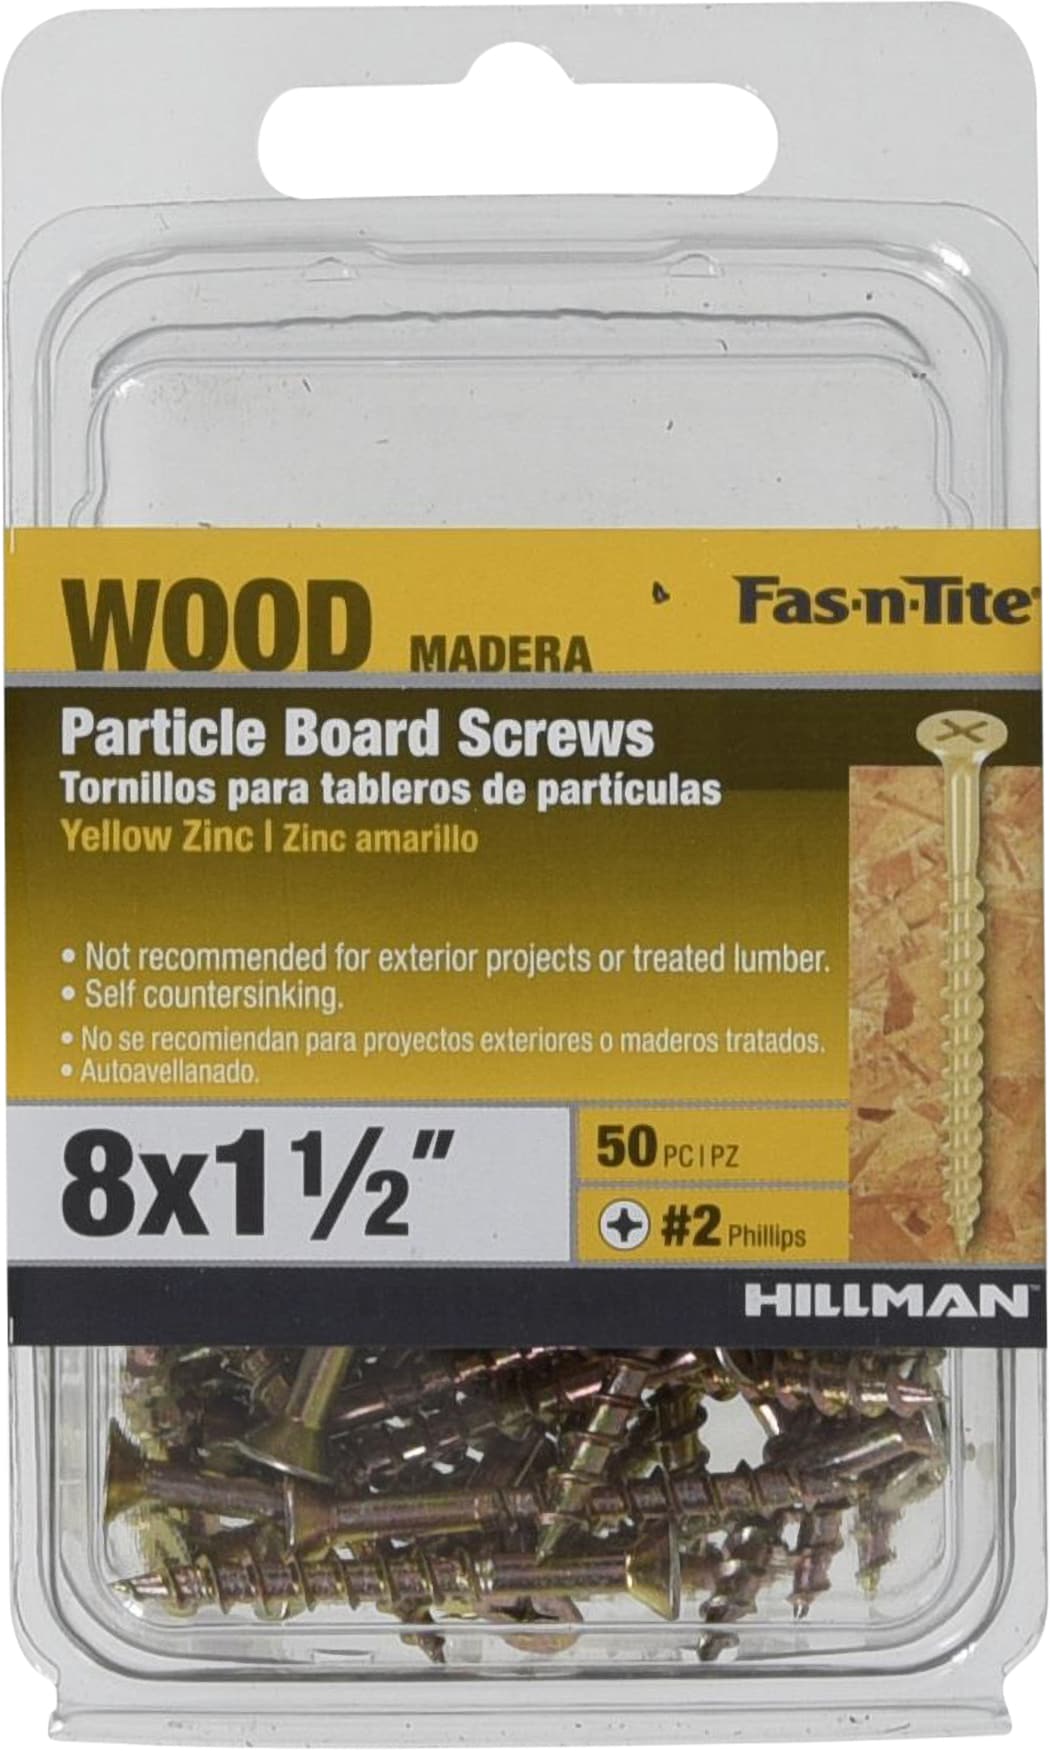 Fas-n-Tite #8 x 1-1/2-in Yellow Zinc Particle Board Screws